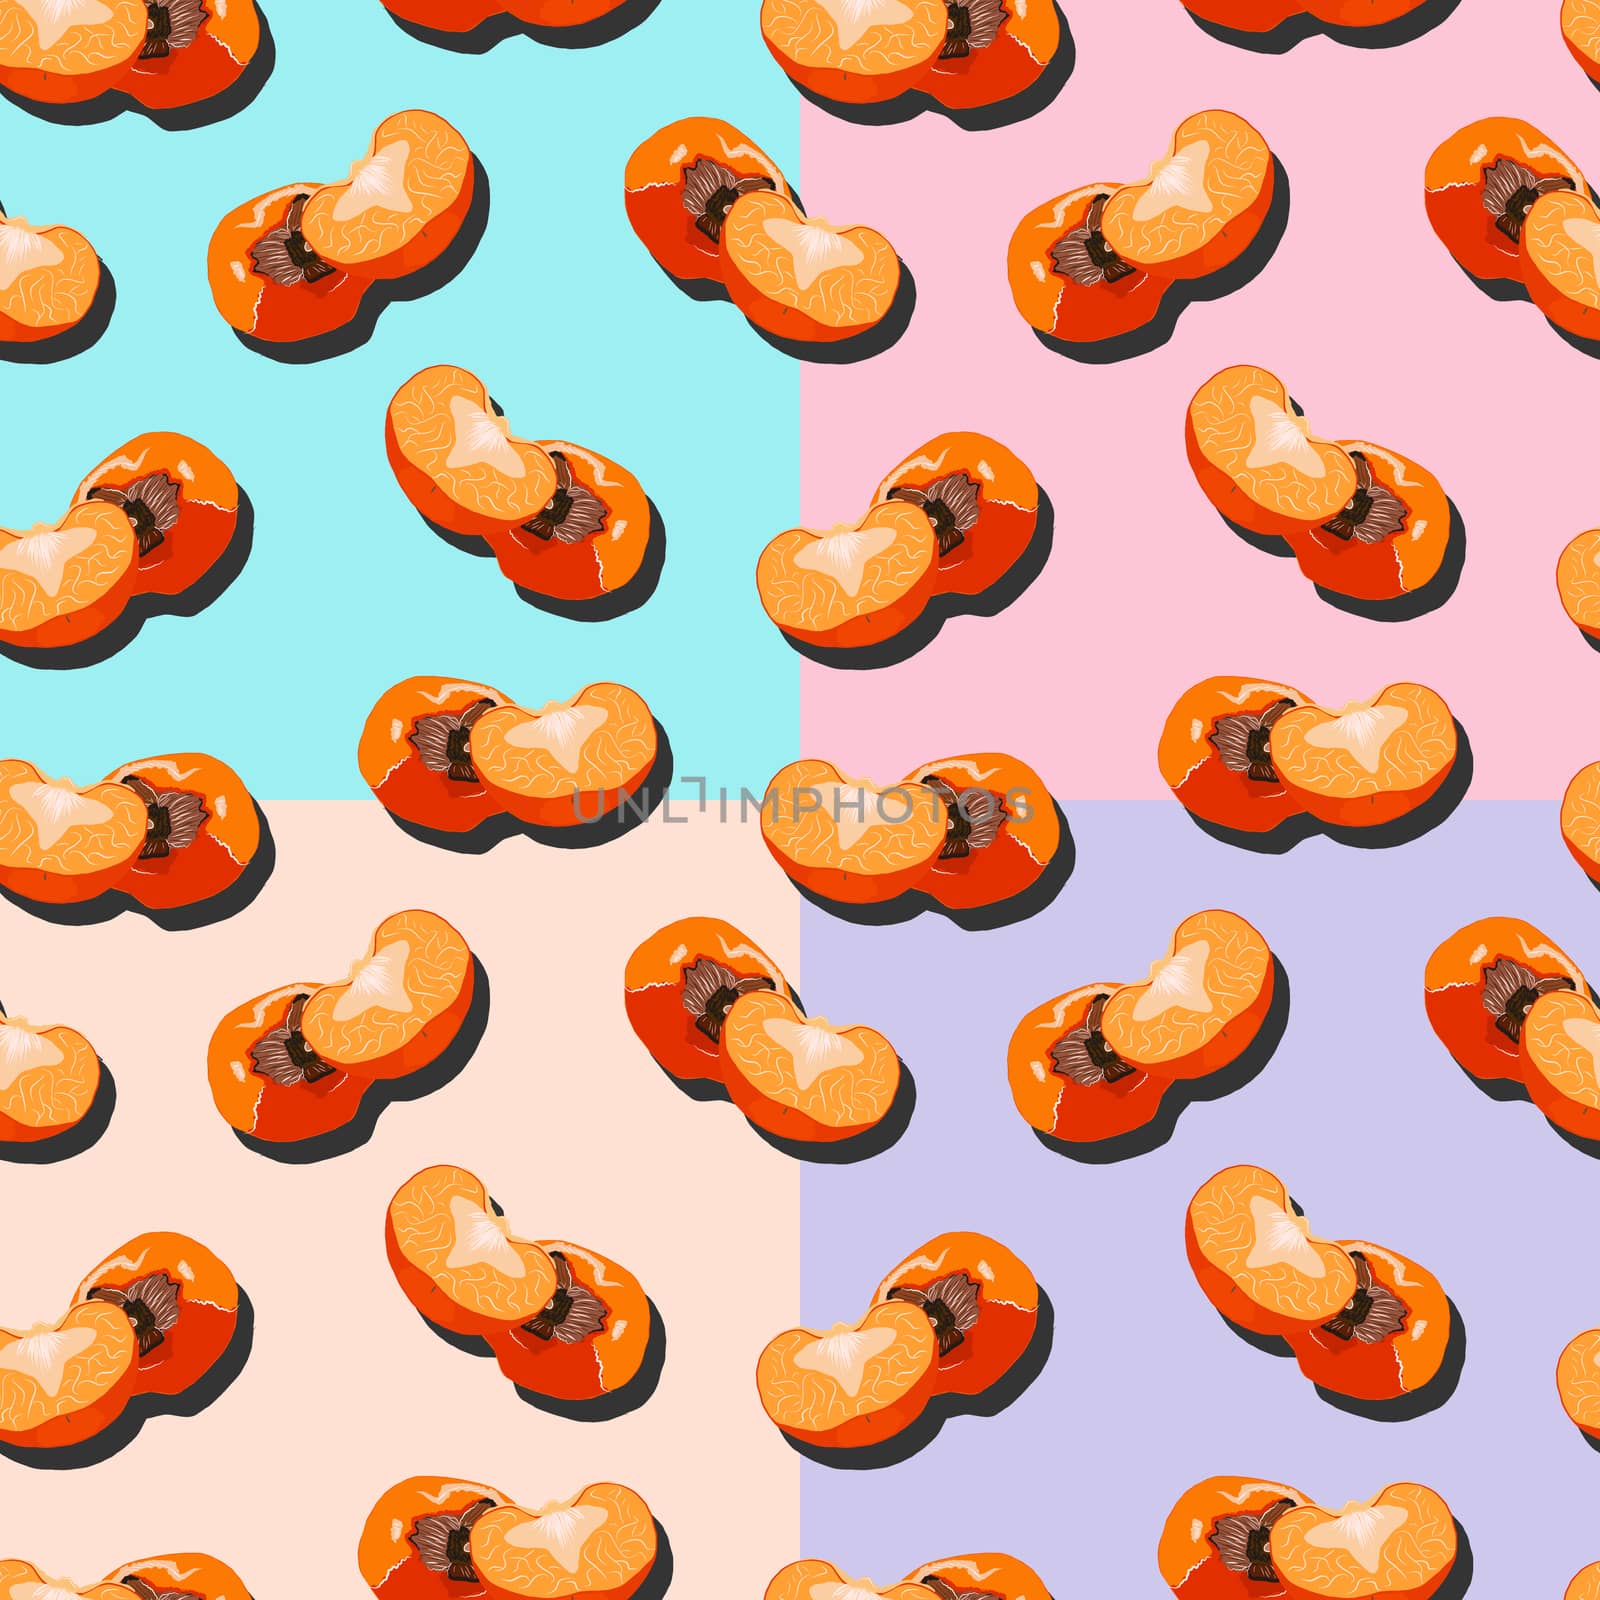 Sharon fruit whole and sliced top view with shadow pop art seamless pattern on turquoise, pink, purple and yellow background. Persimmon endless design for wallpapers, fabrics, textiles, packaging.